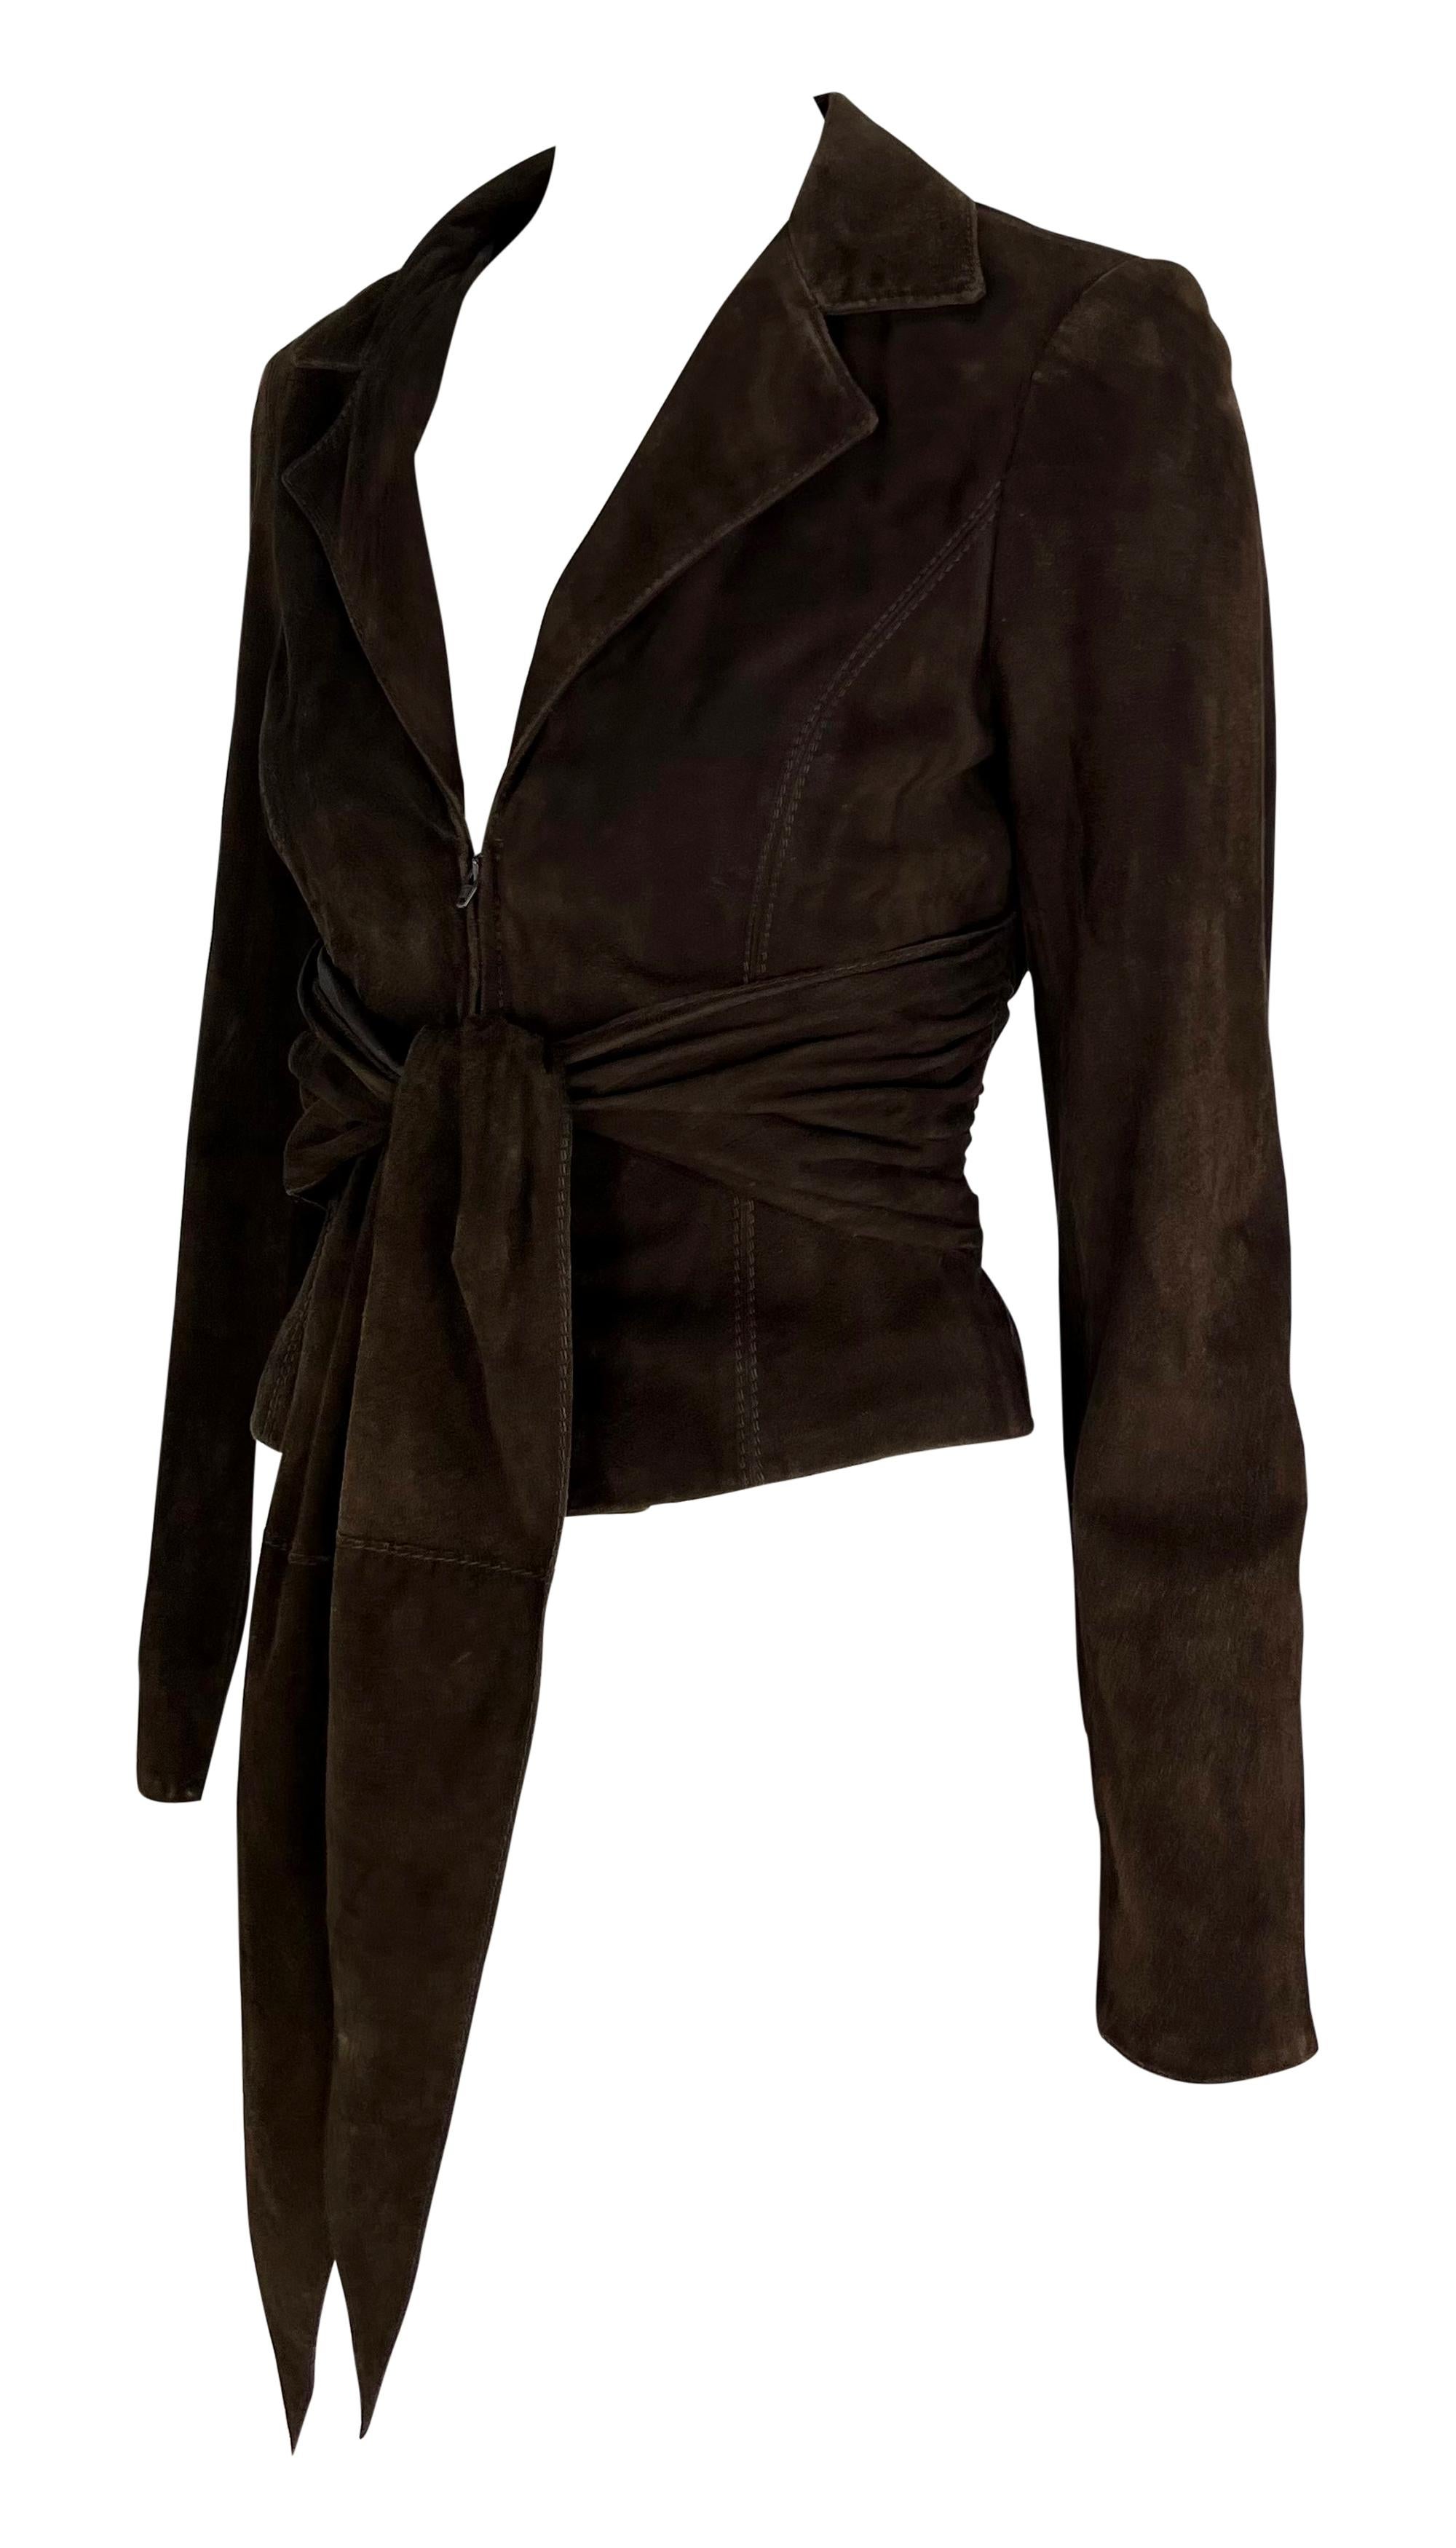 From the early 2000s, this brown Valentino jacket is constructed entirely of suede. The jacket features a notch lapel, plunging neckline, and a built-in tie at the waist. This luxurious Valentino jacket is the perfect versatile wardrobe addition.